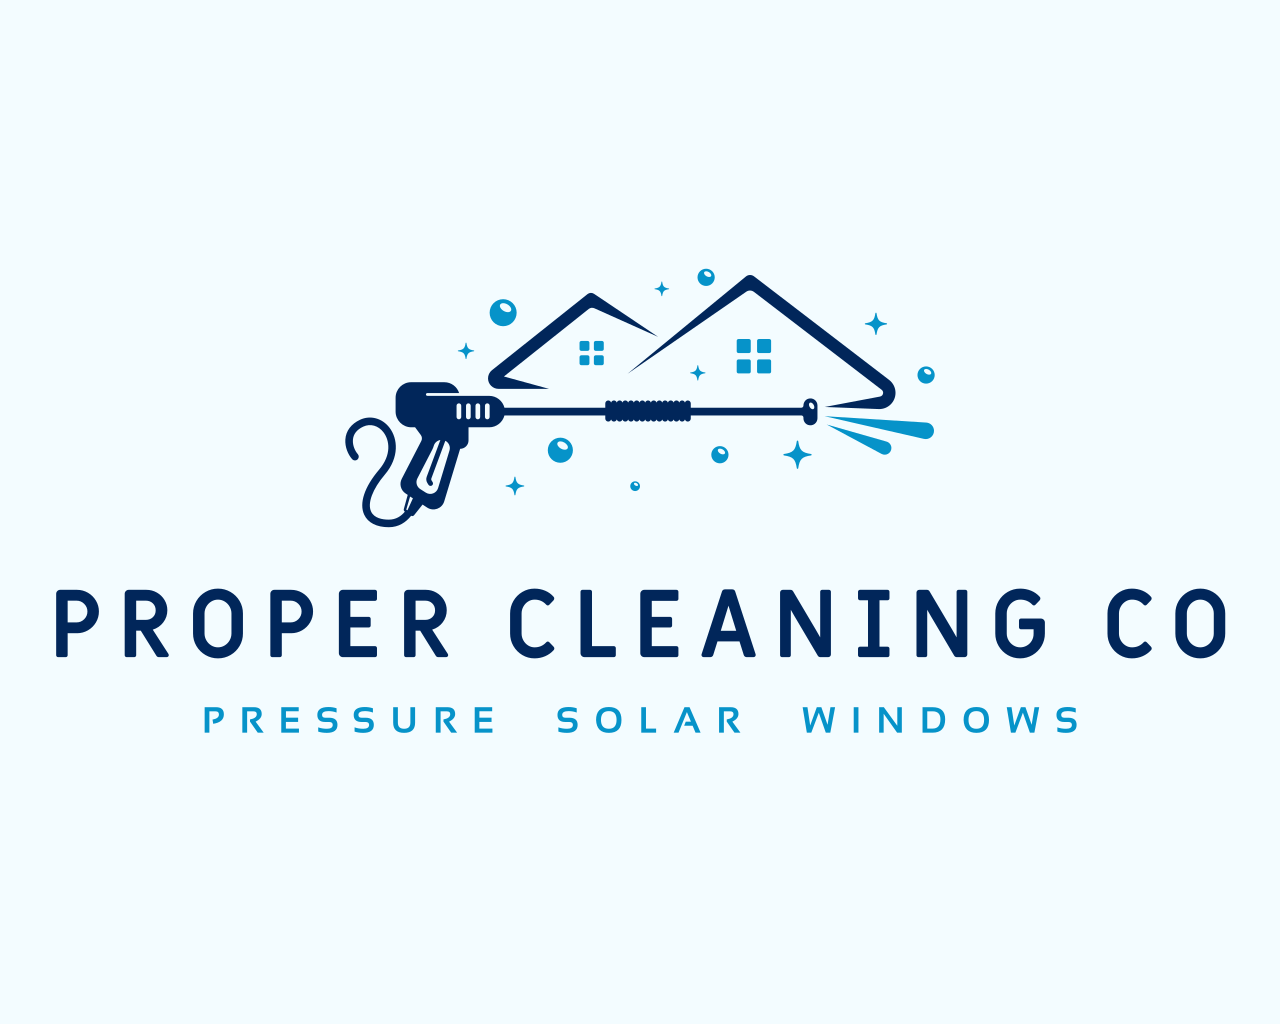 Proper Cleaning Co